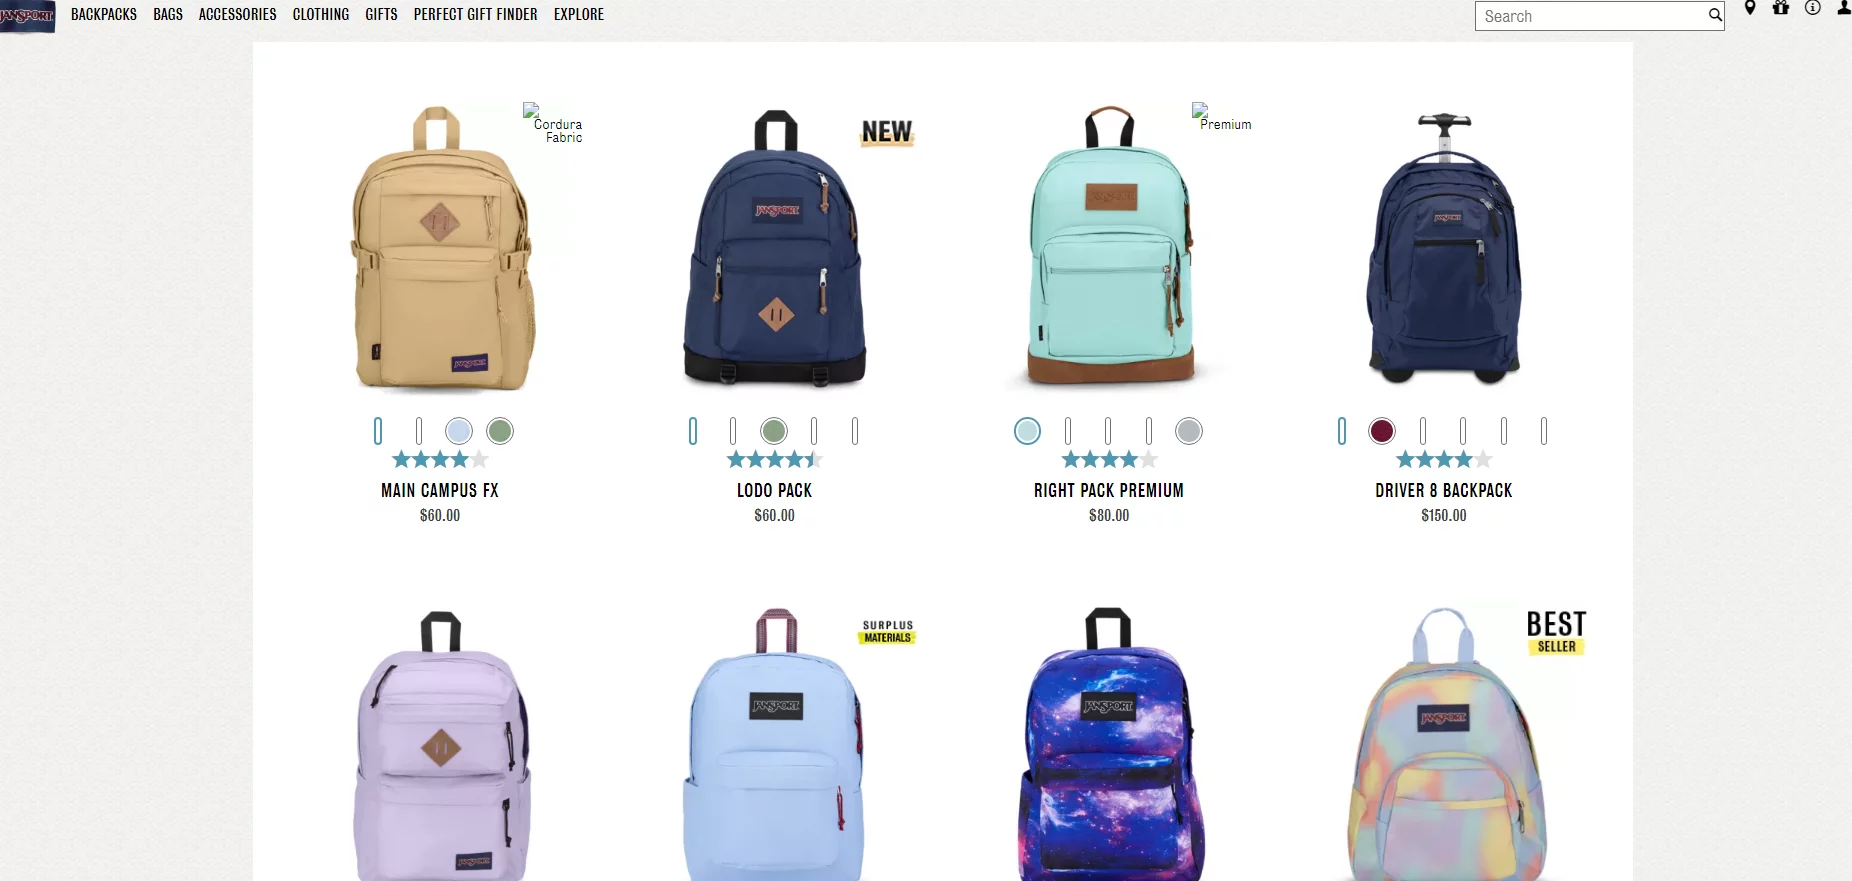 Best Bags to Dropshipping 2: Backpacks